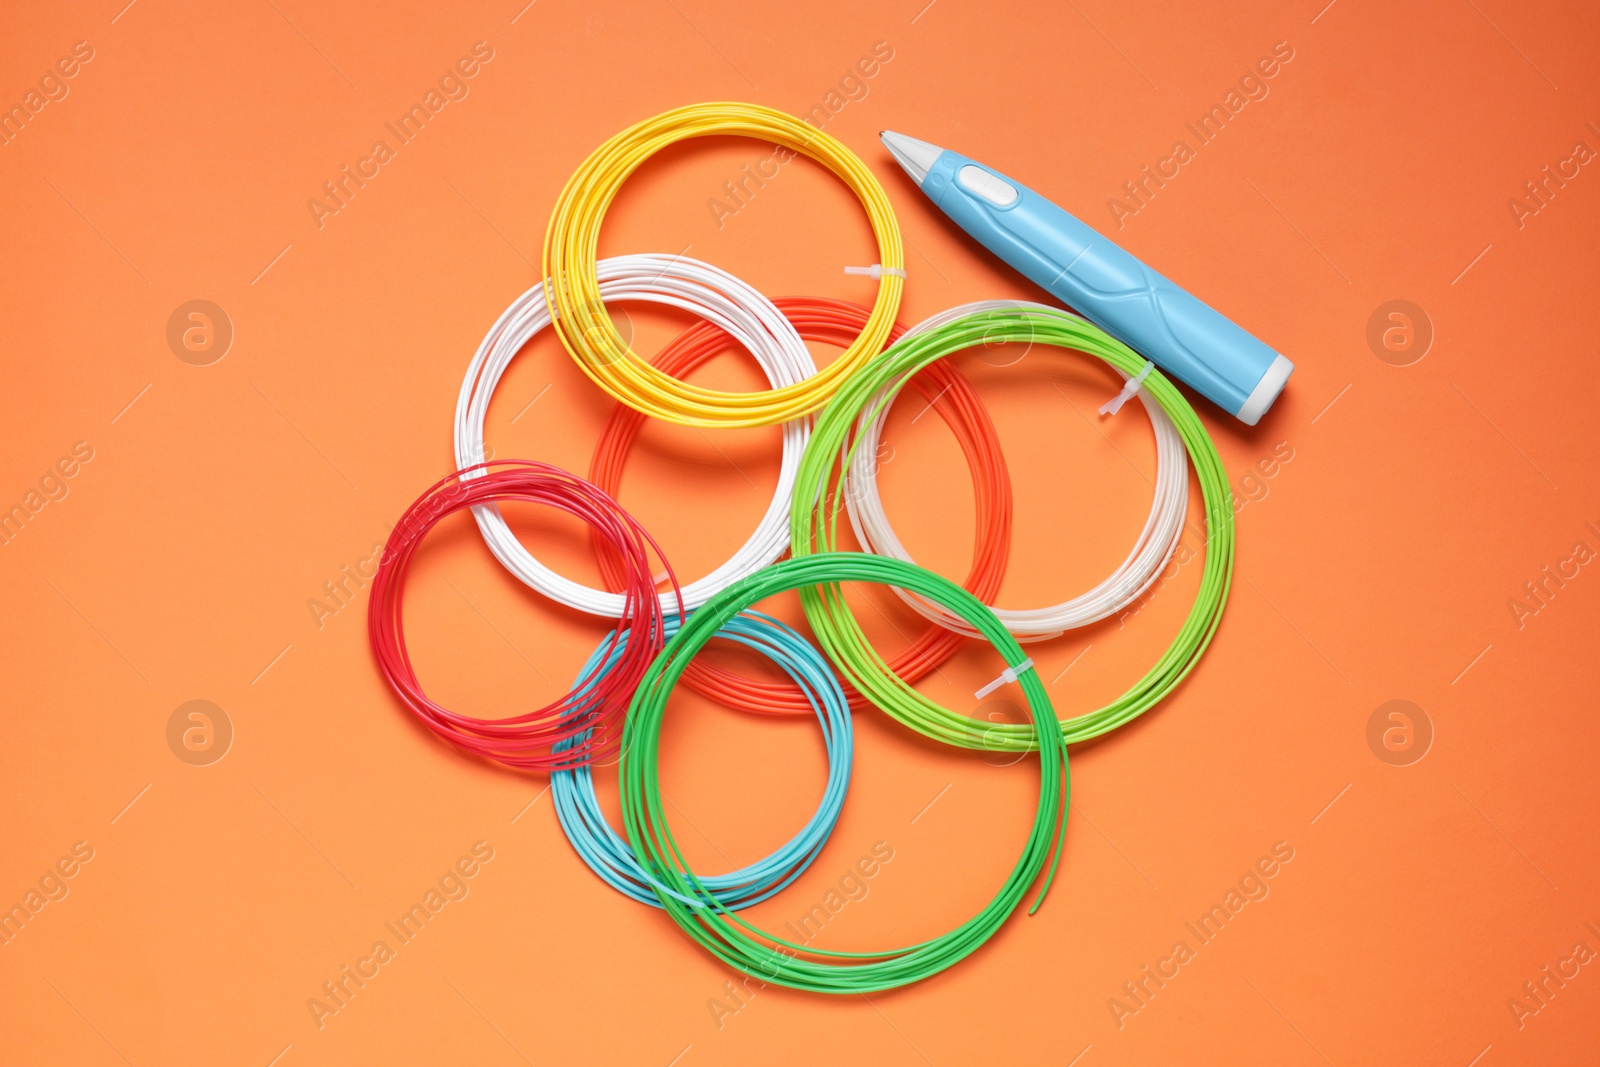 Photo of Stylish 3D pen and colorful plastic filaments on orange background, flat lay